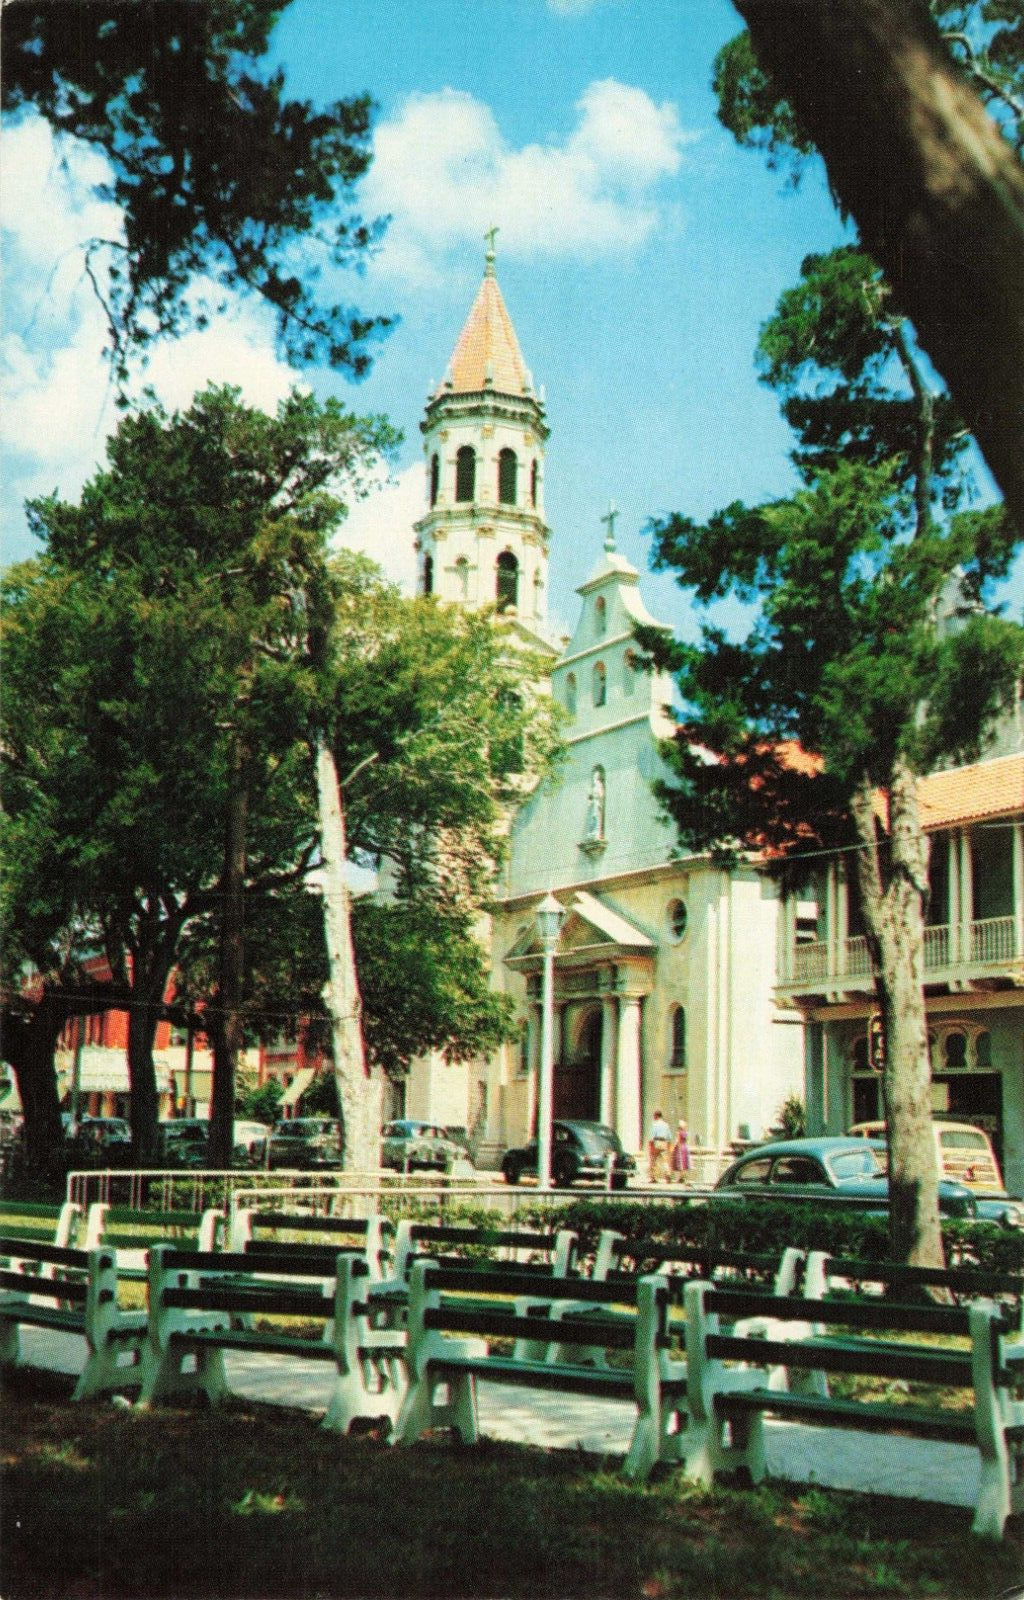 St Augustine Florida, Old Cathedral Church, Old Cars, Benches, Vintage Postcard